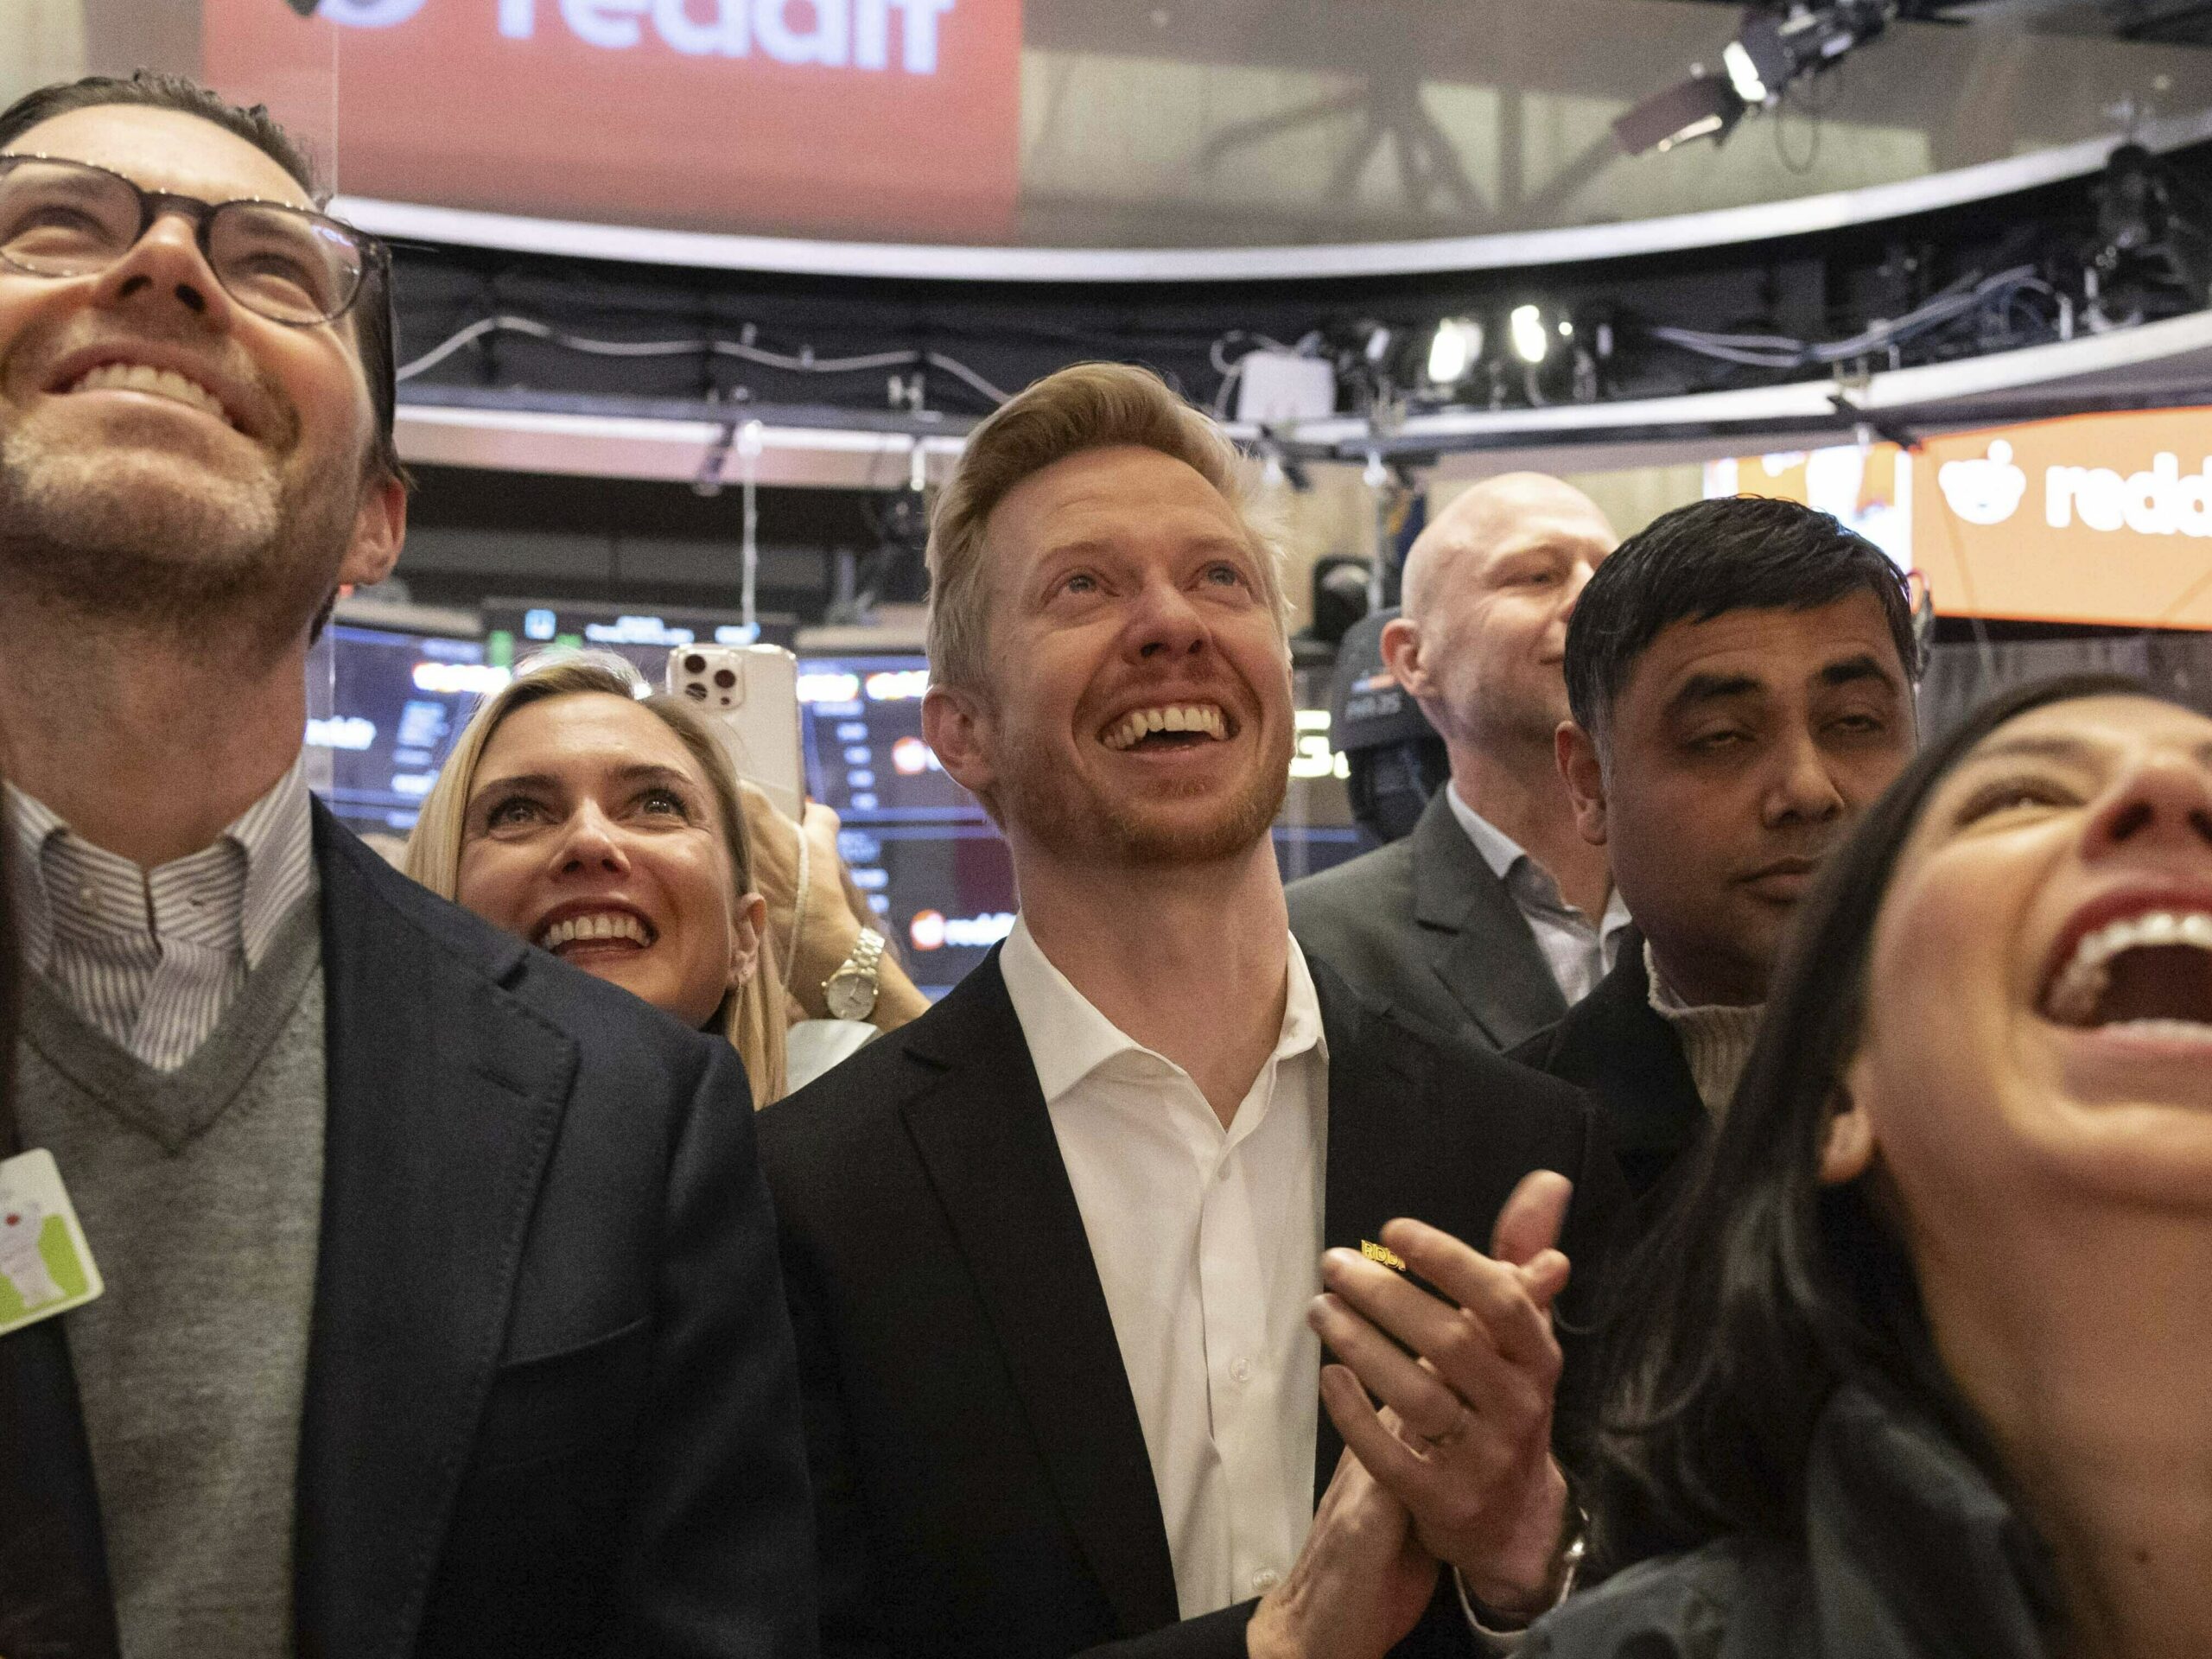 Reddit stock starts trading 38% above initial public offering price